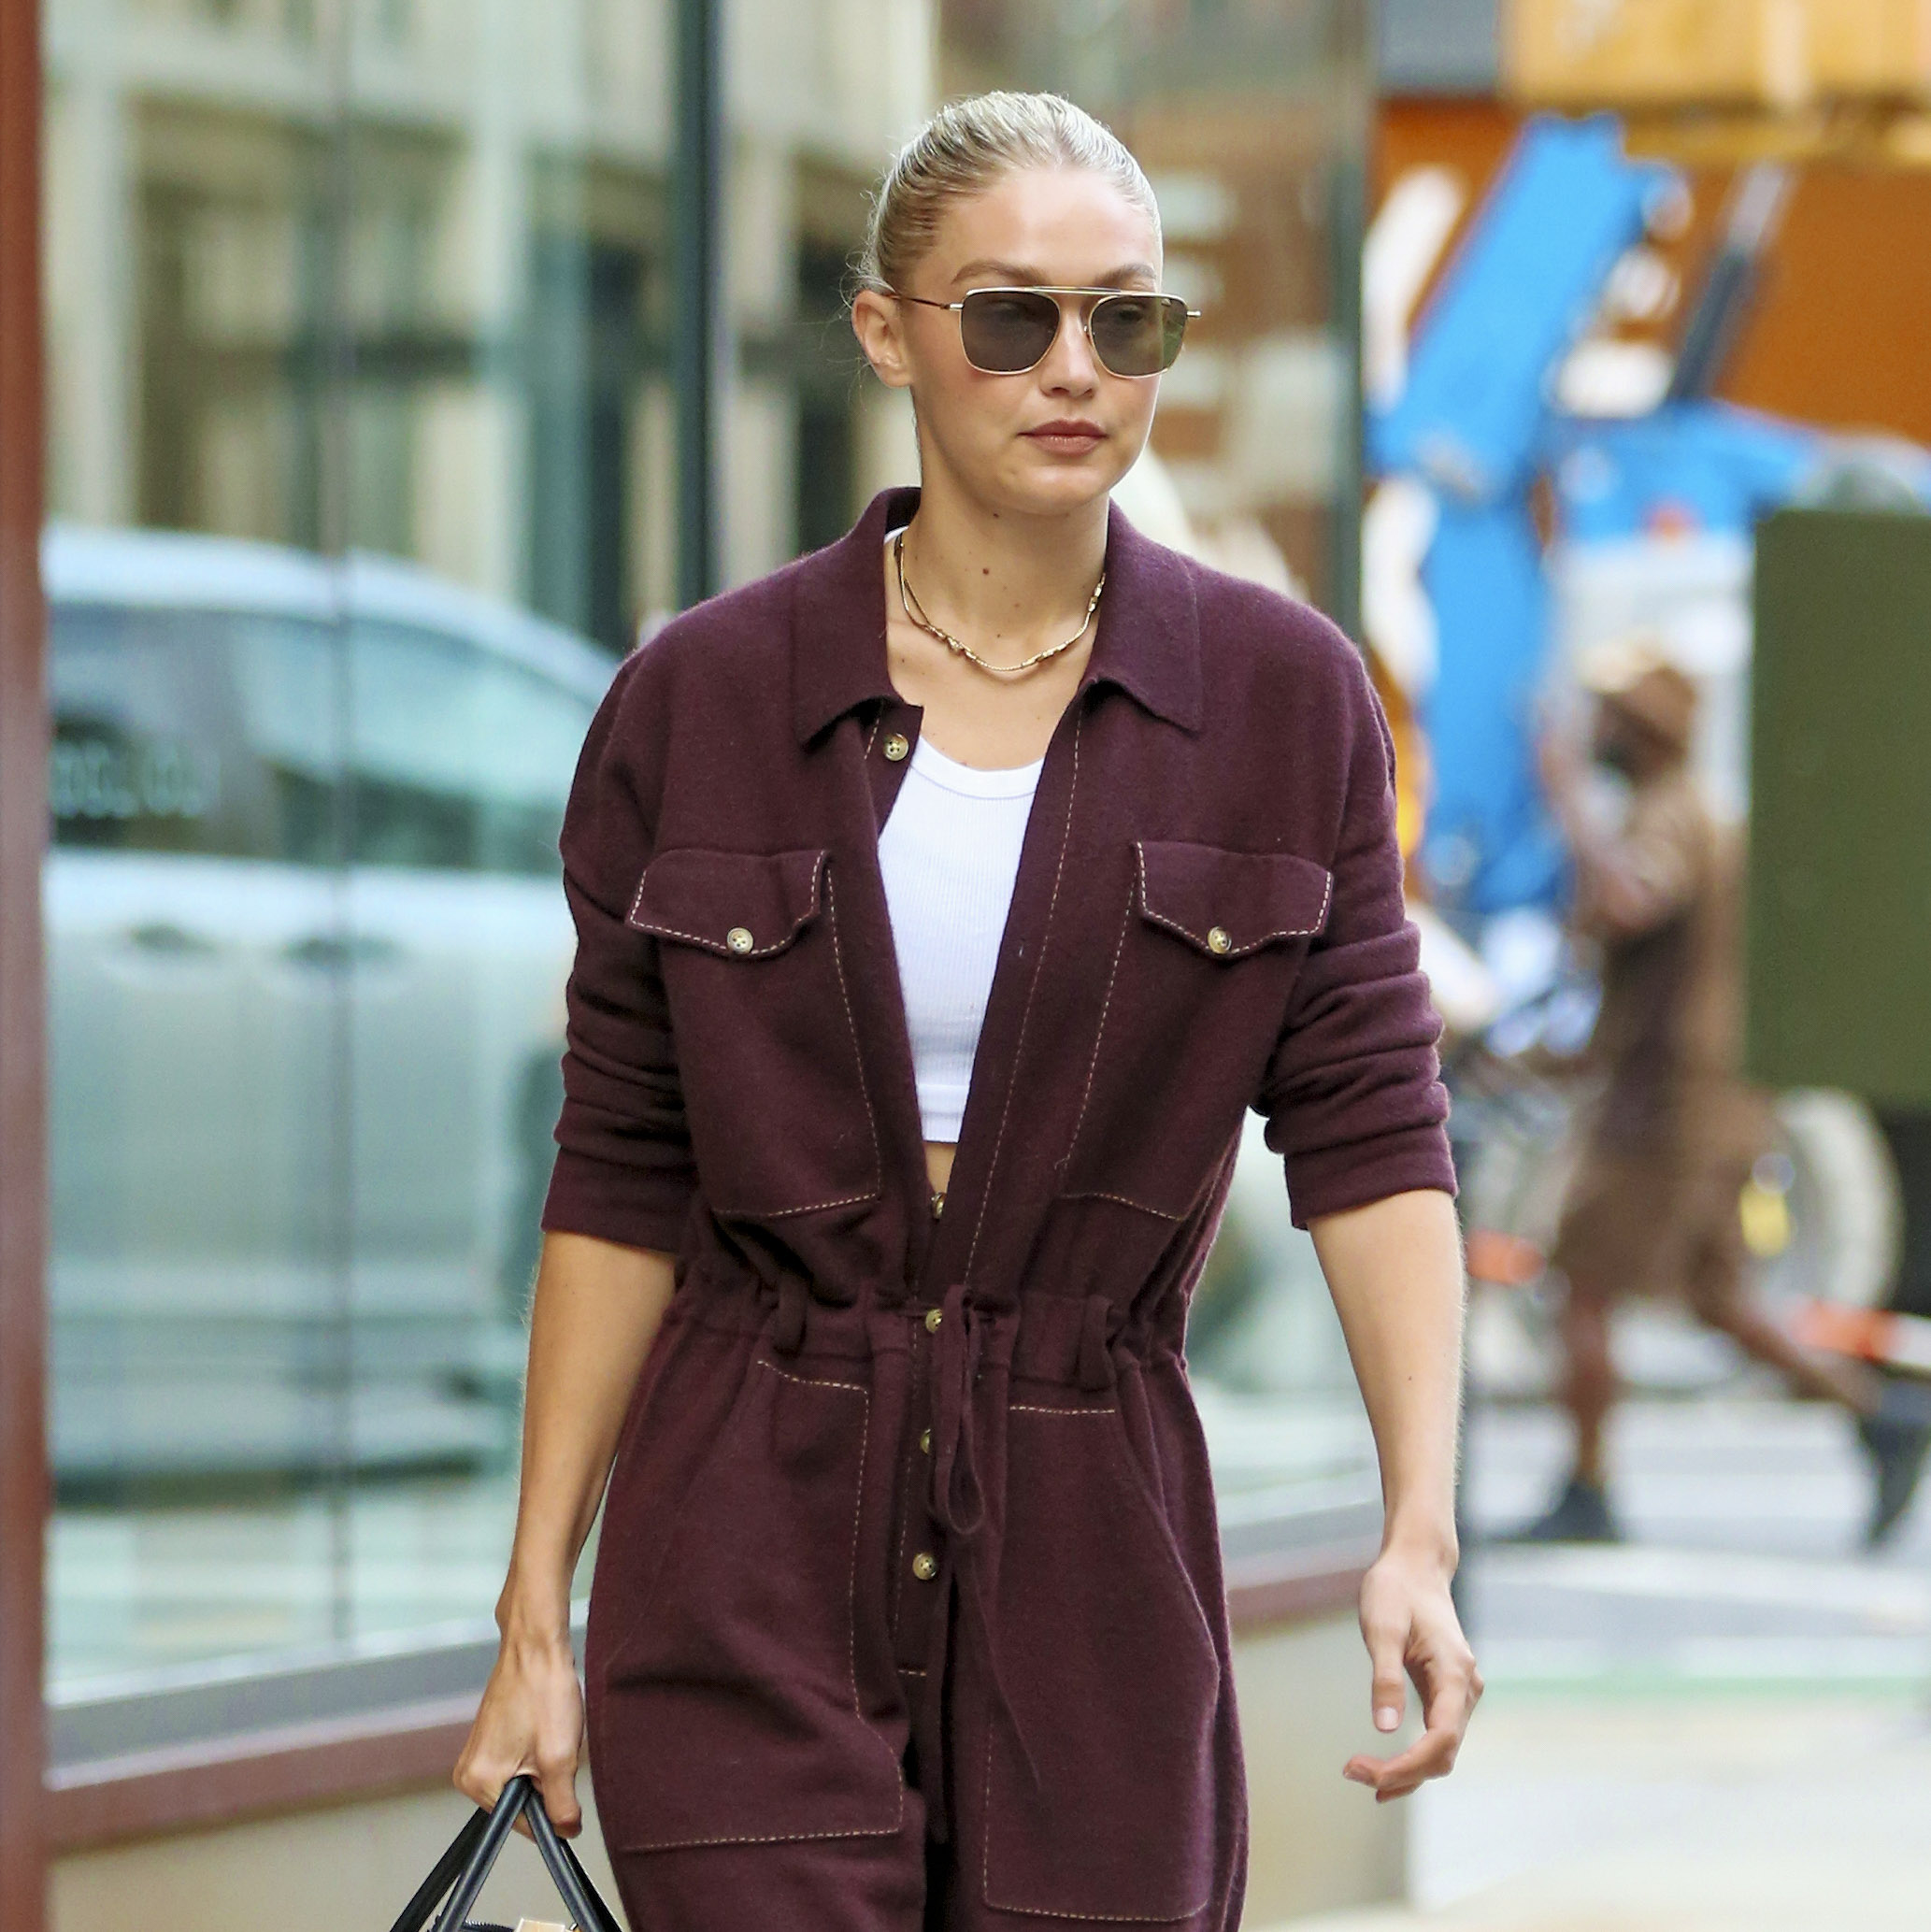 Heading to New York Airport, Gigi Hadid wore a burgundy romper that was unbuttoned to reveal a white top.